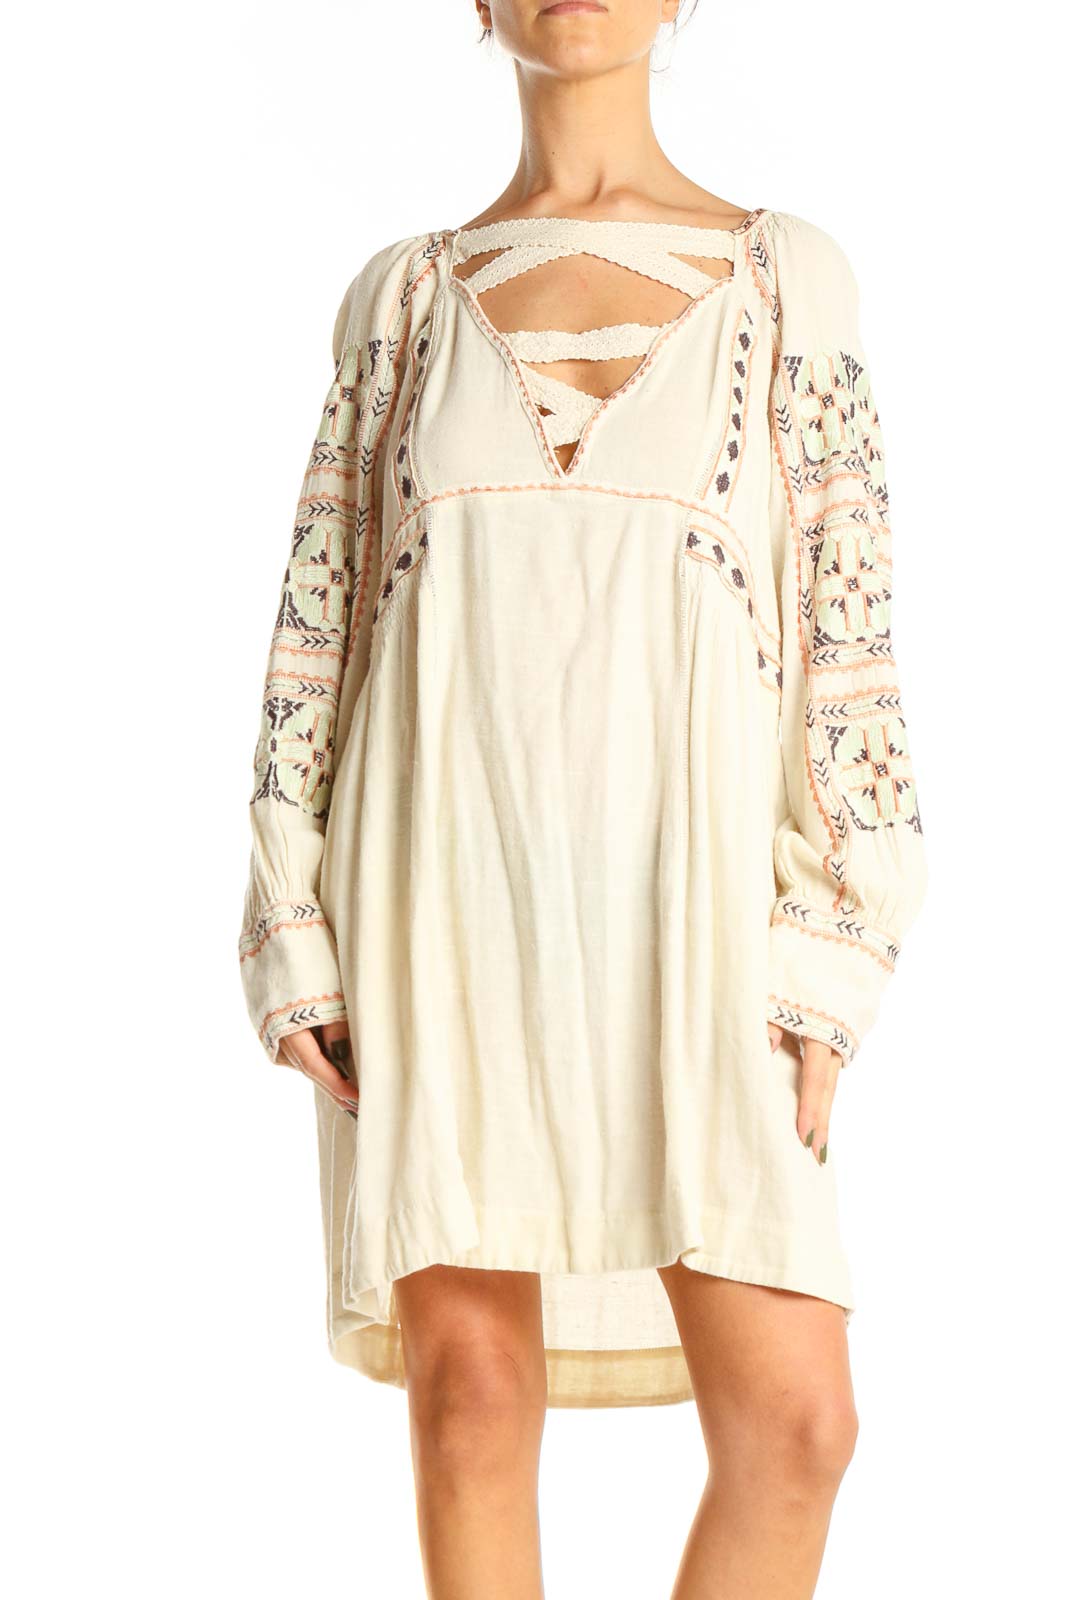 Beige Bohemian Embroidered Shift Dress Front